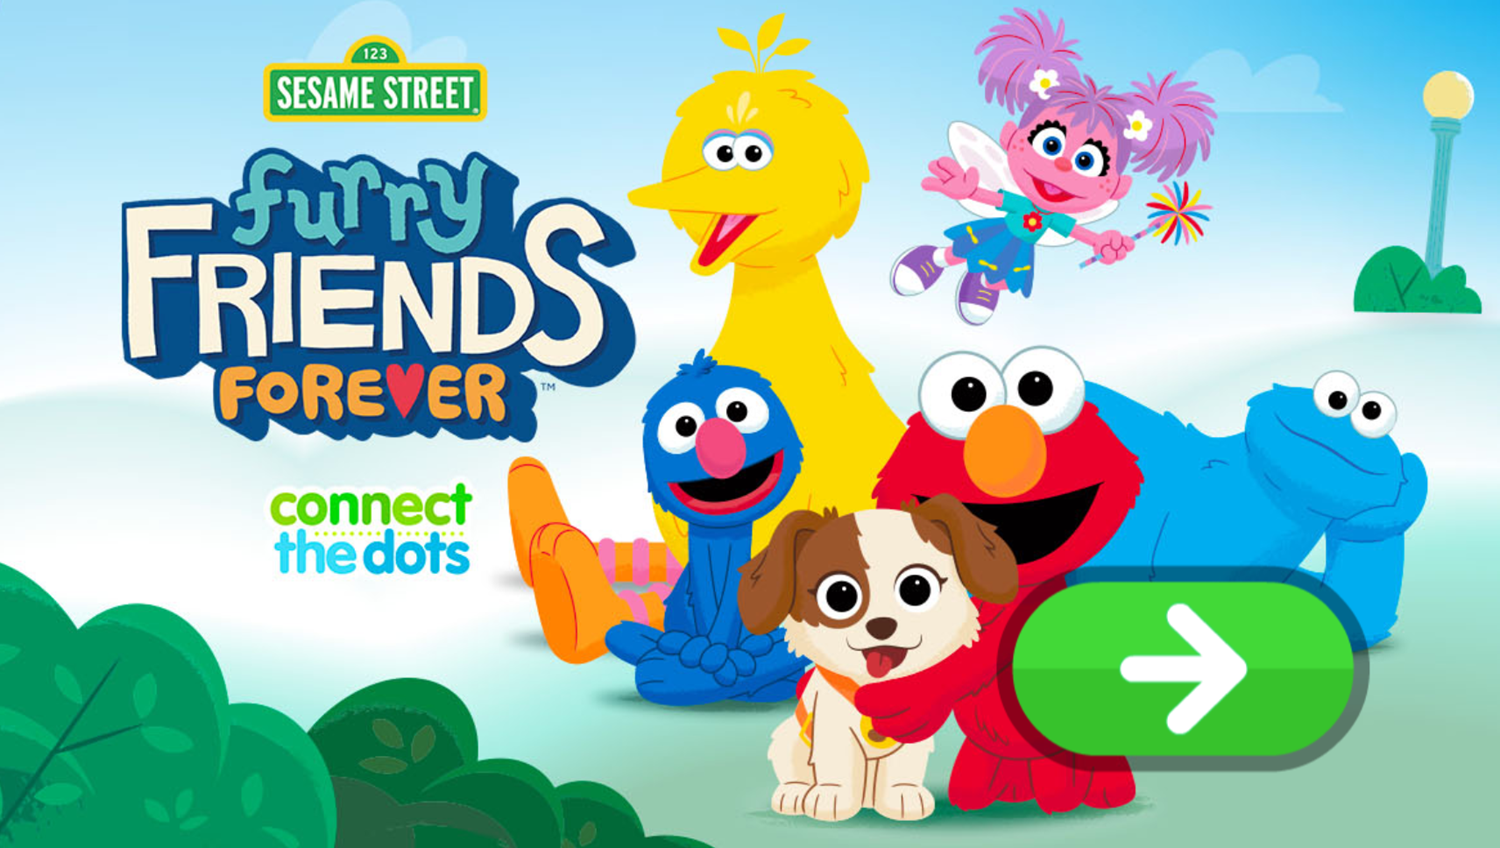 Sesame Street Furry Friends Forever Connect the Dots Game Welcome Screen Screenshot.